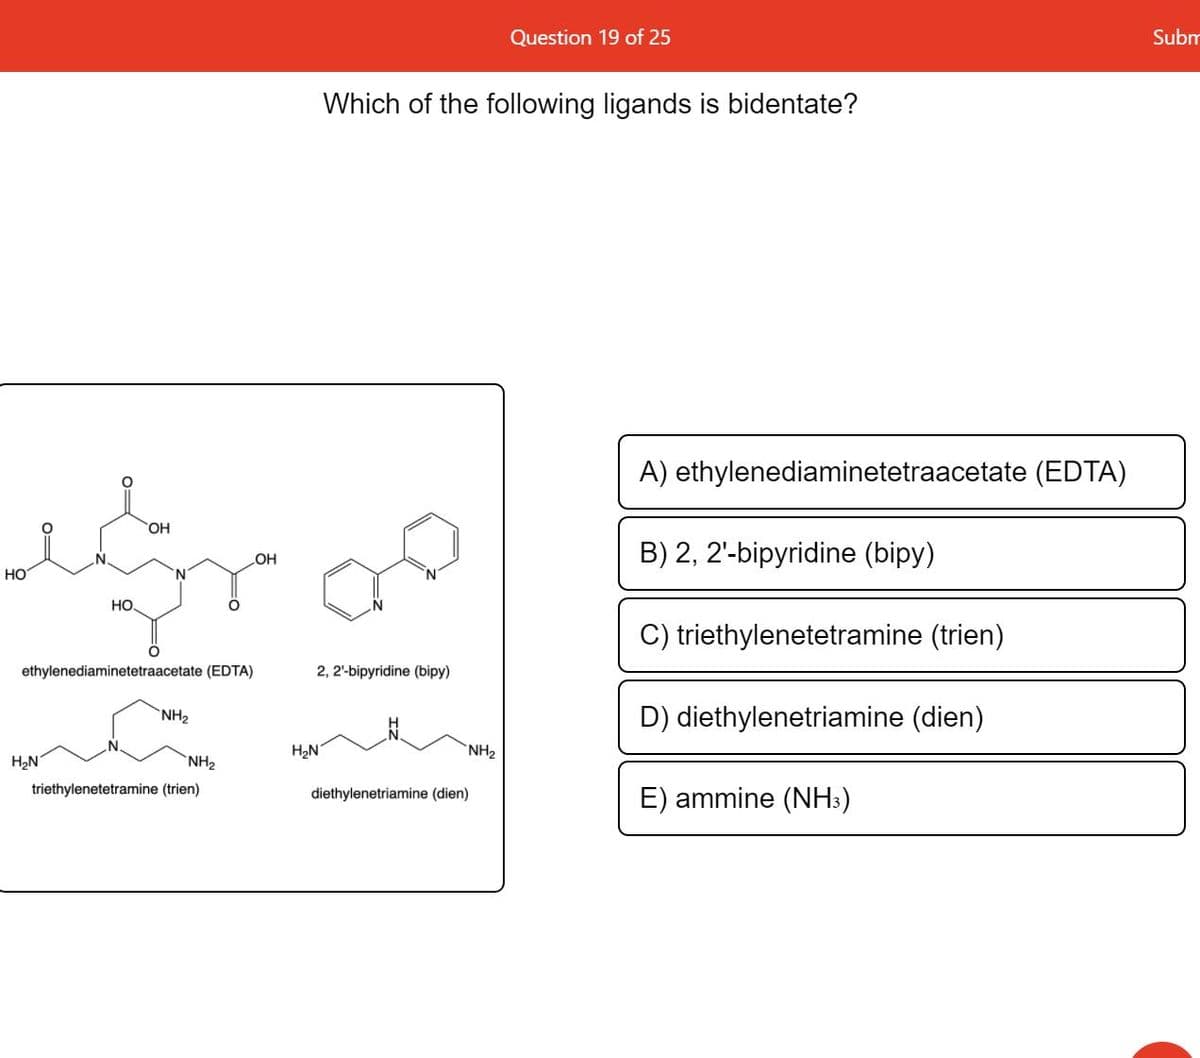 Question 19 of 25
Subm
Which of the following ligands is bidentate?
A) ethylenediaminetetraacetate (EDTA)
HO,
HO
B) 2, 2'-bipyridine (bipy)
HO
HO.
C) triethylenetetramine (trien)
ethylenediaminetetraacetate (EDTA)
2, 2'-bipyridine (bipy)
NH2
D) diethylenetriamine (dien)
H2N
`NH2
H2N
NH2
triethylenetetramine (trien)
E) ammine (NH:)
diethylenetriamine (dien)
